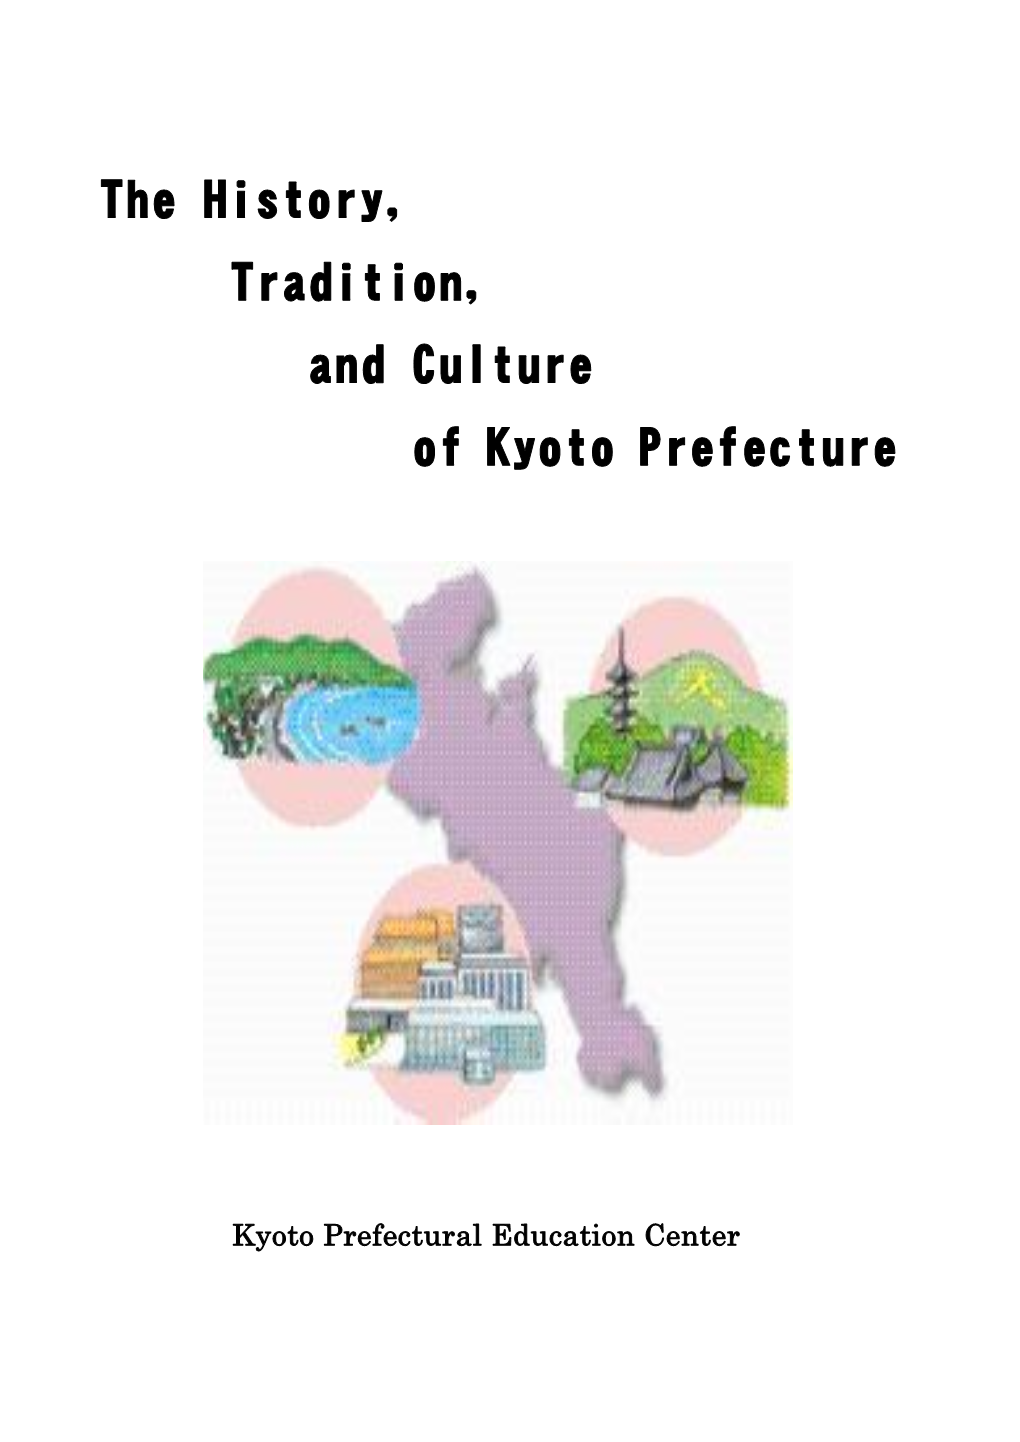 The History, Tradition, and Culture of Kyoto Prefecture